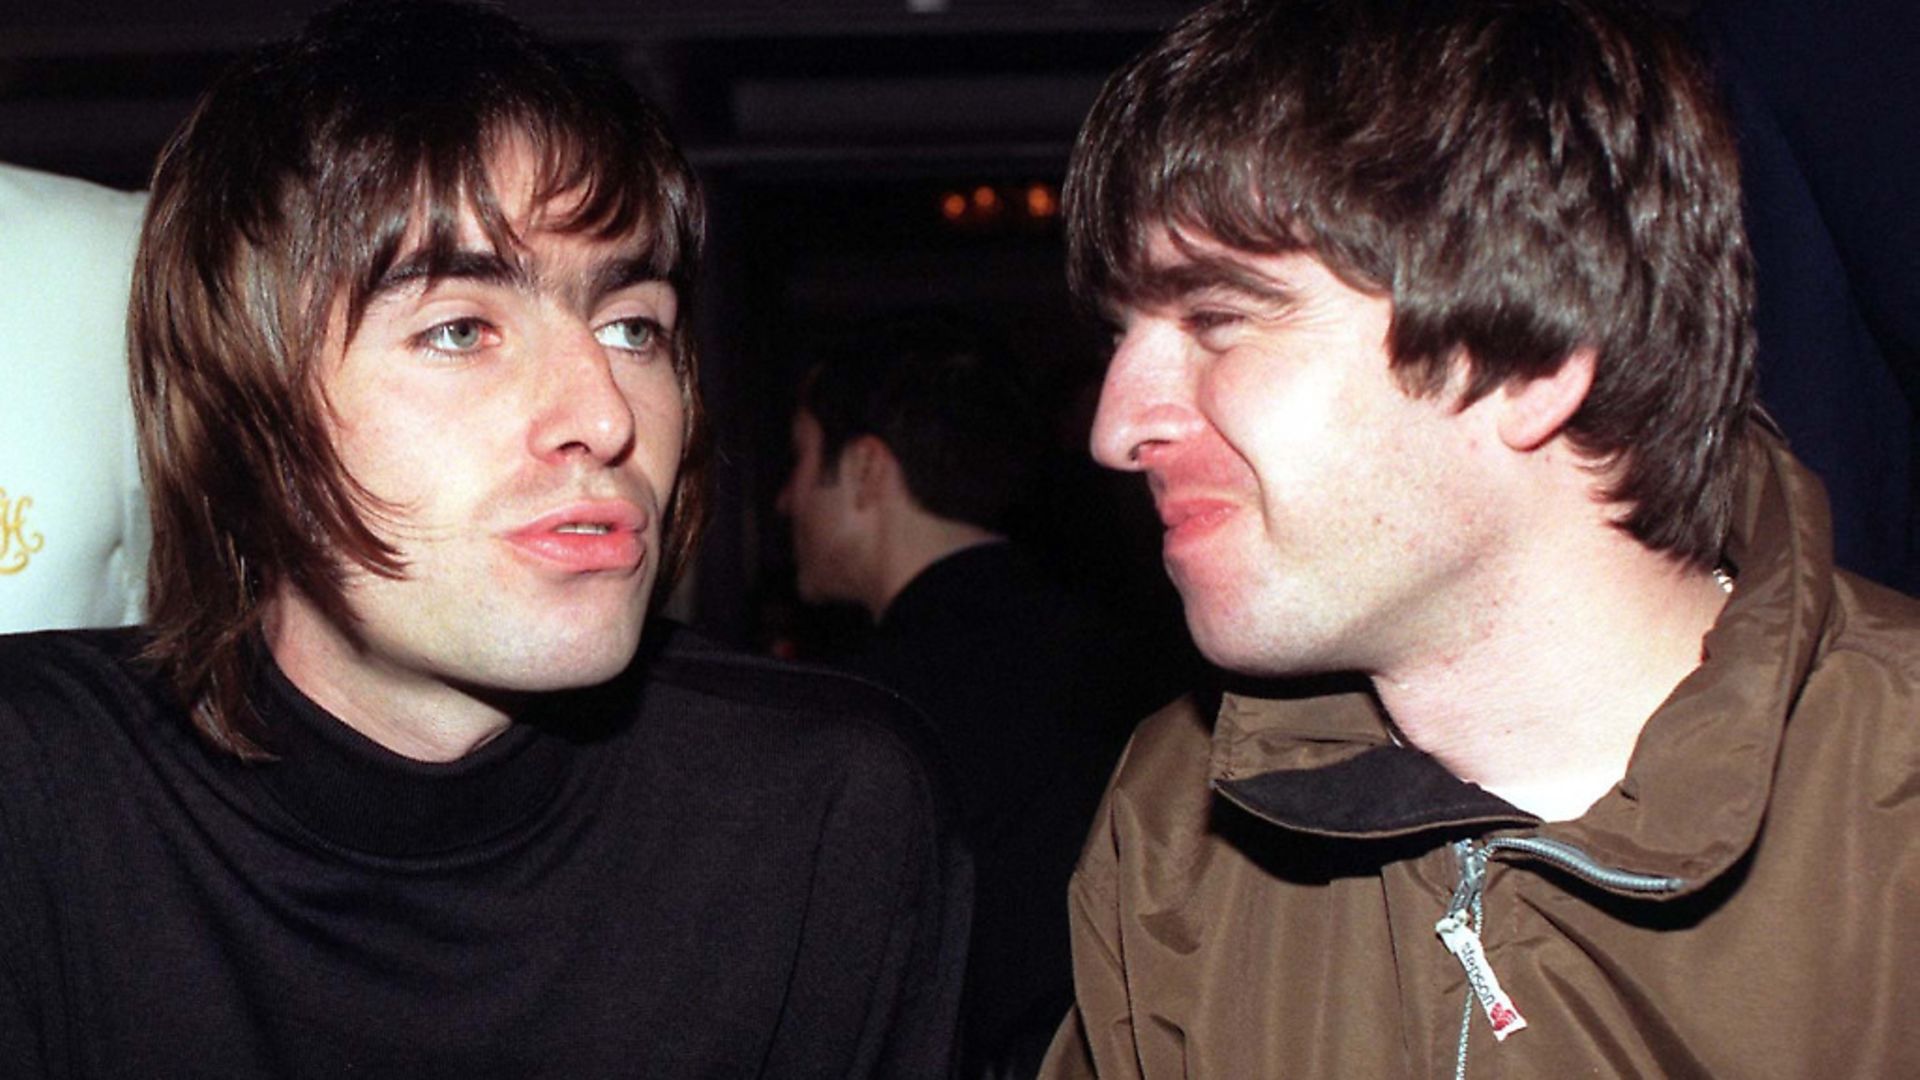 Liam and Noel Gallagher, 2003 - Credit: PA Archive/PA Images